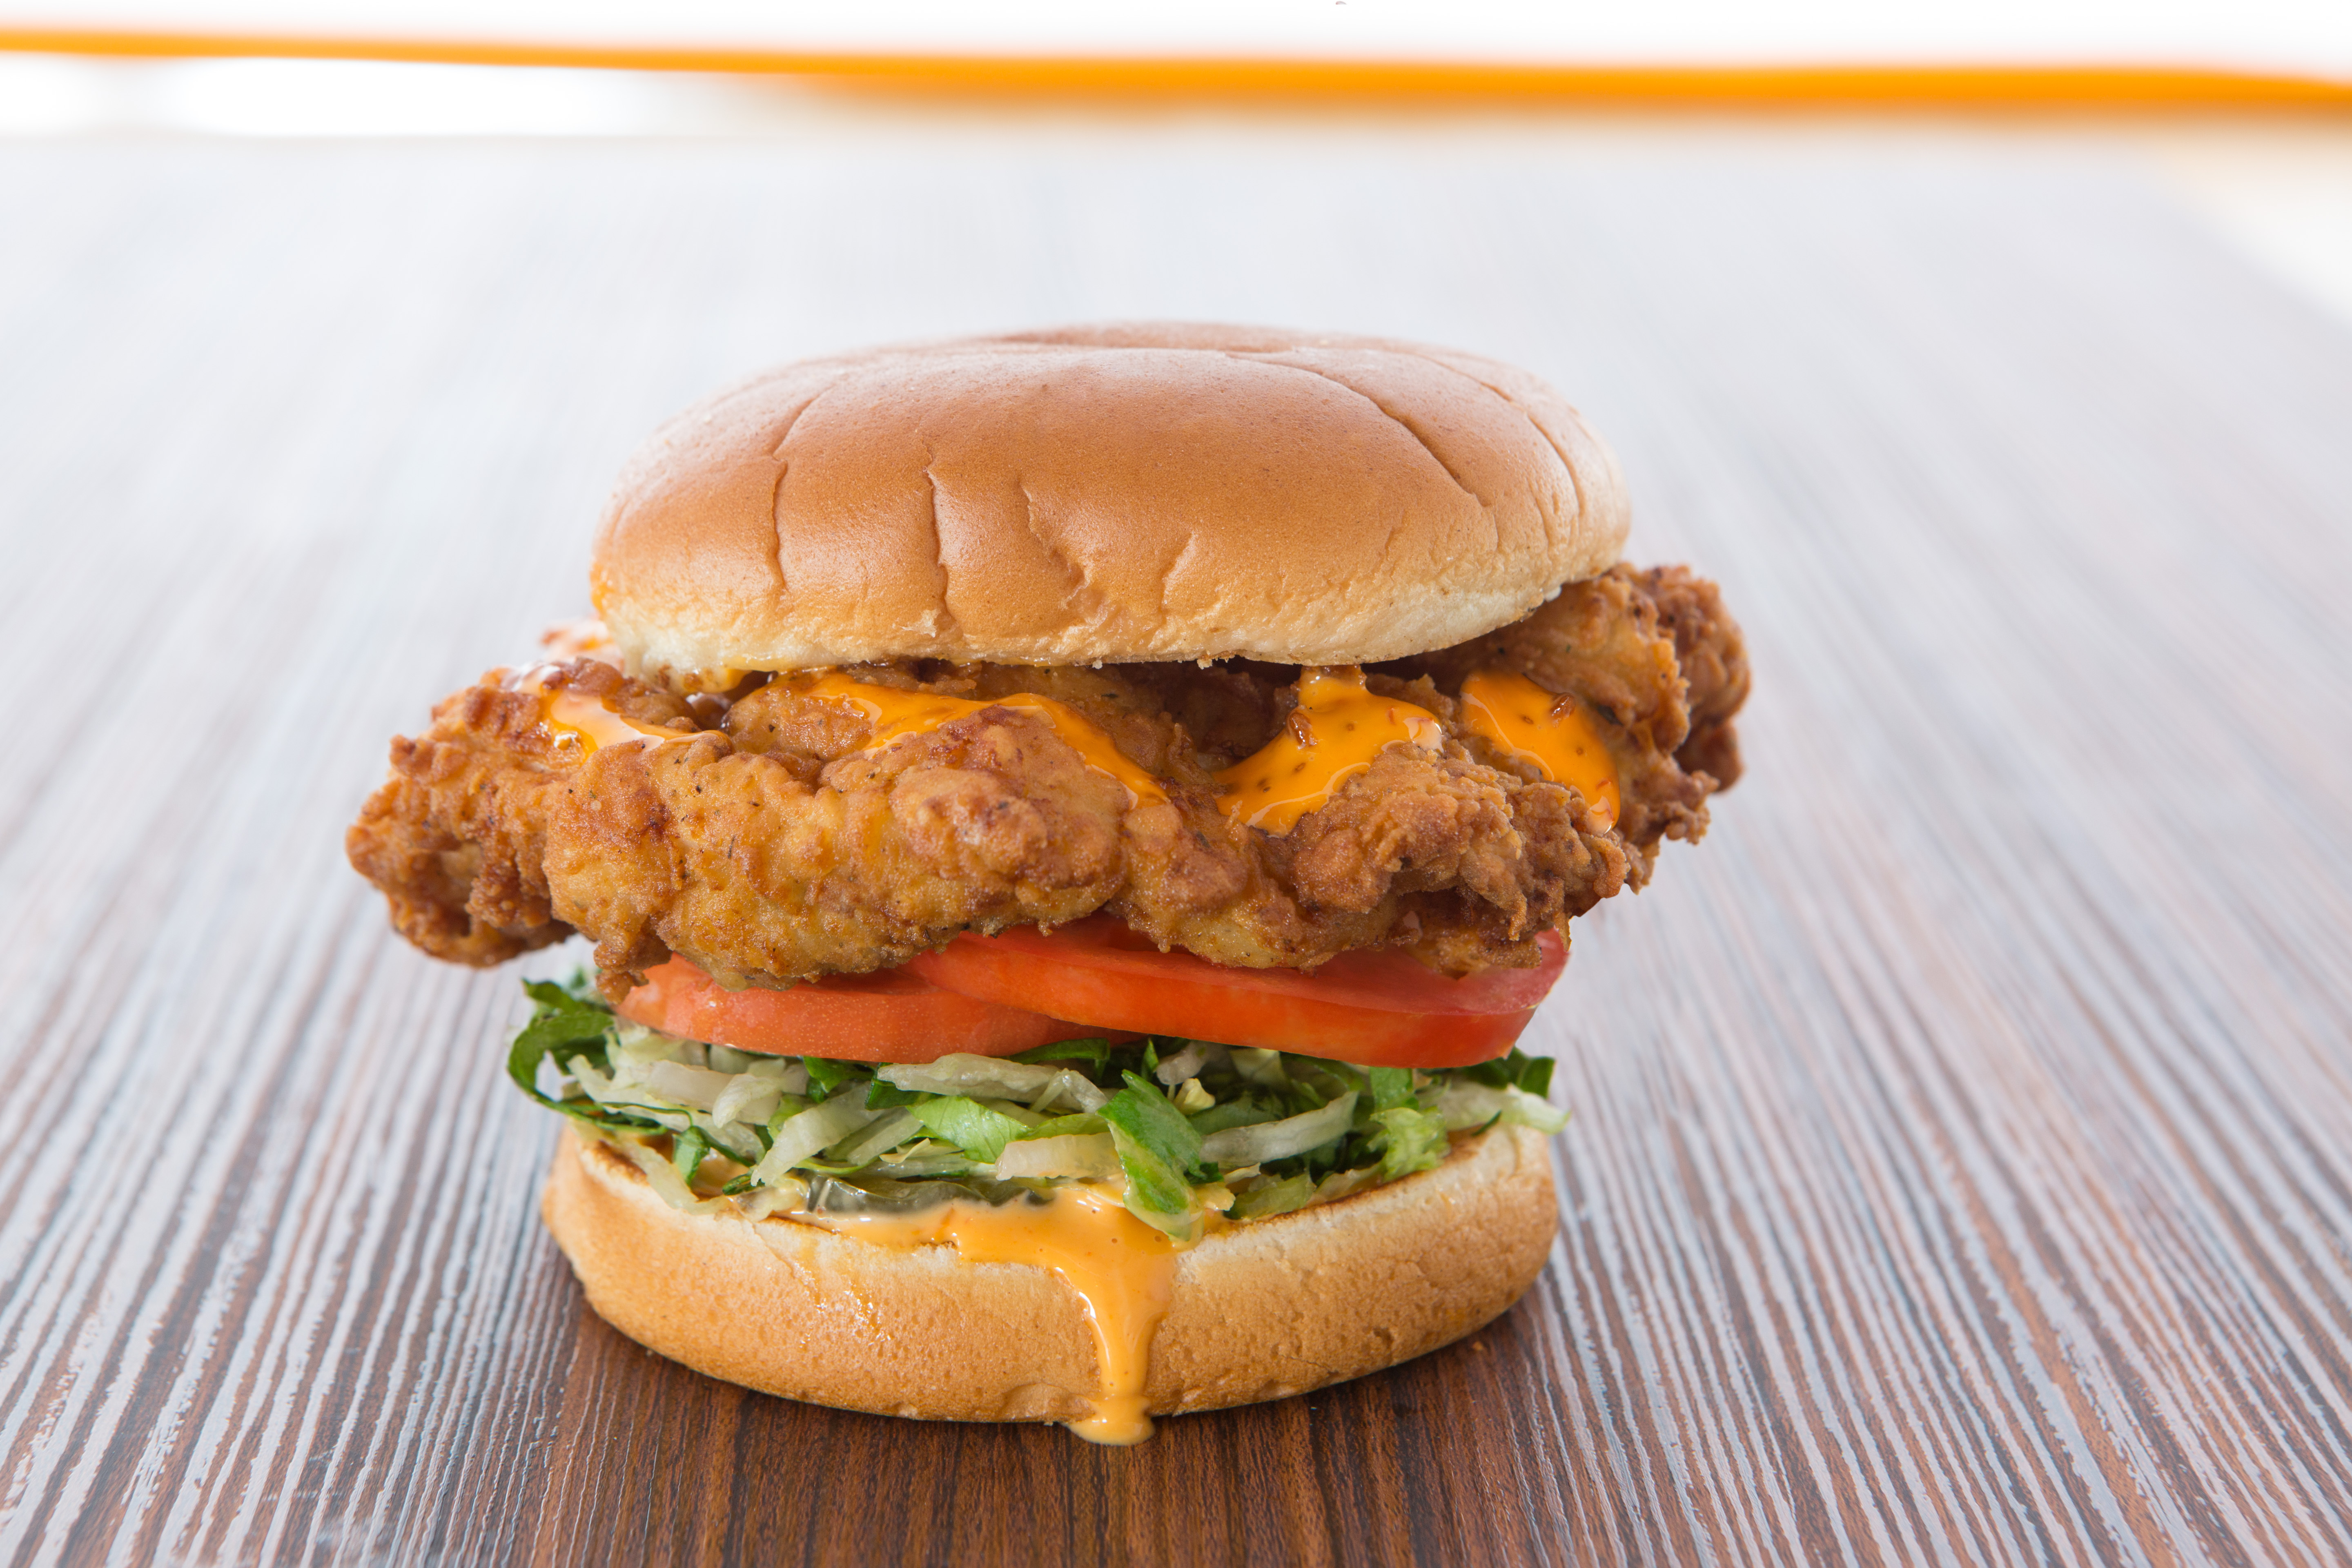 The Habit launches new fried chicken burger + giveaway